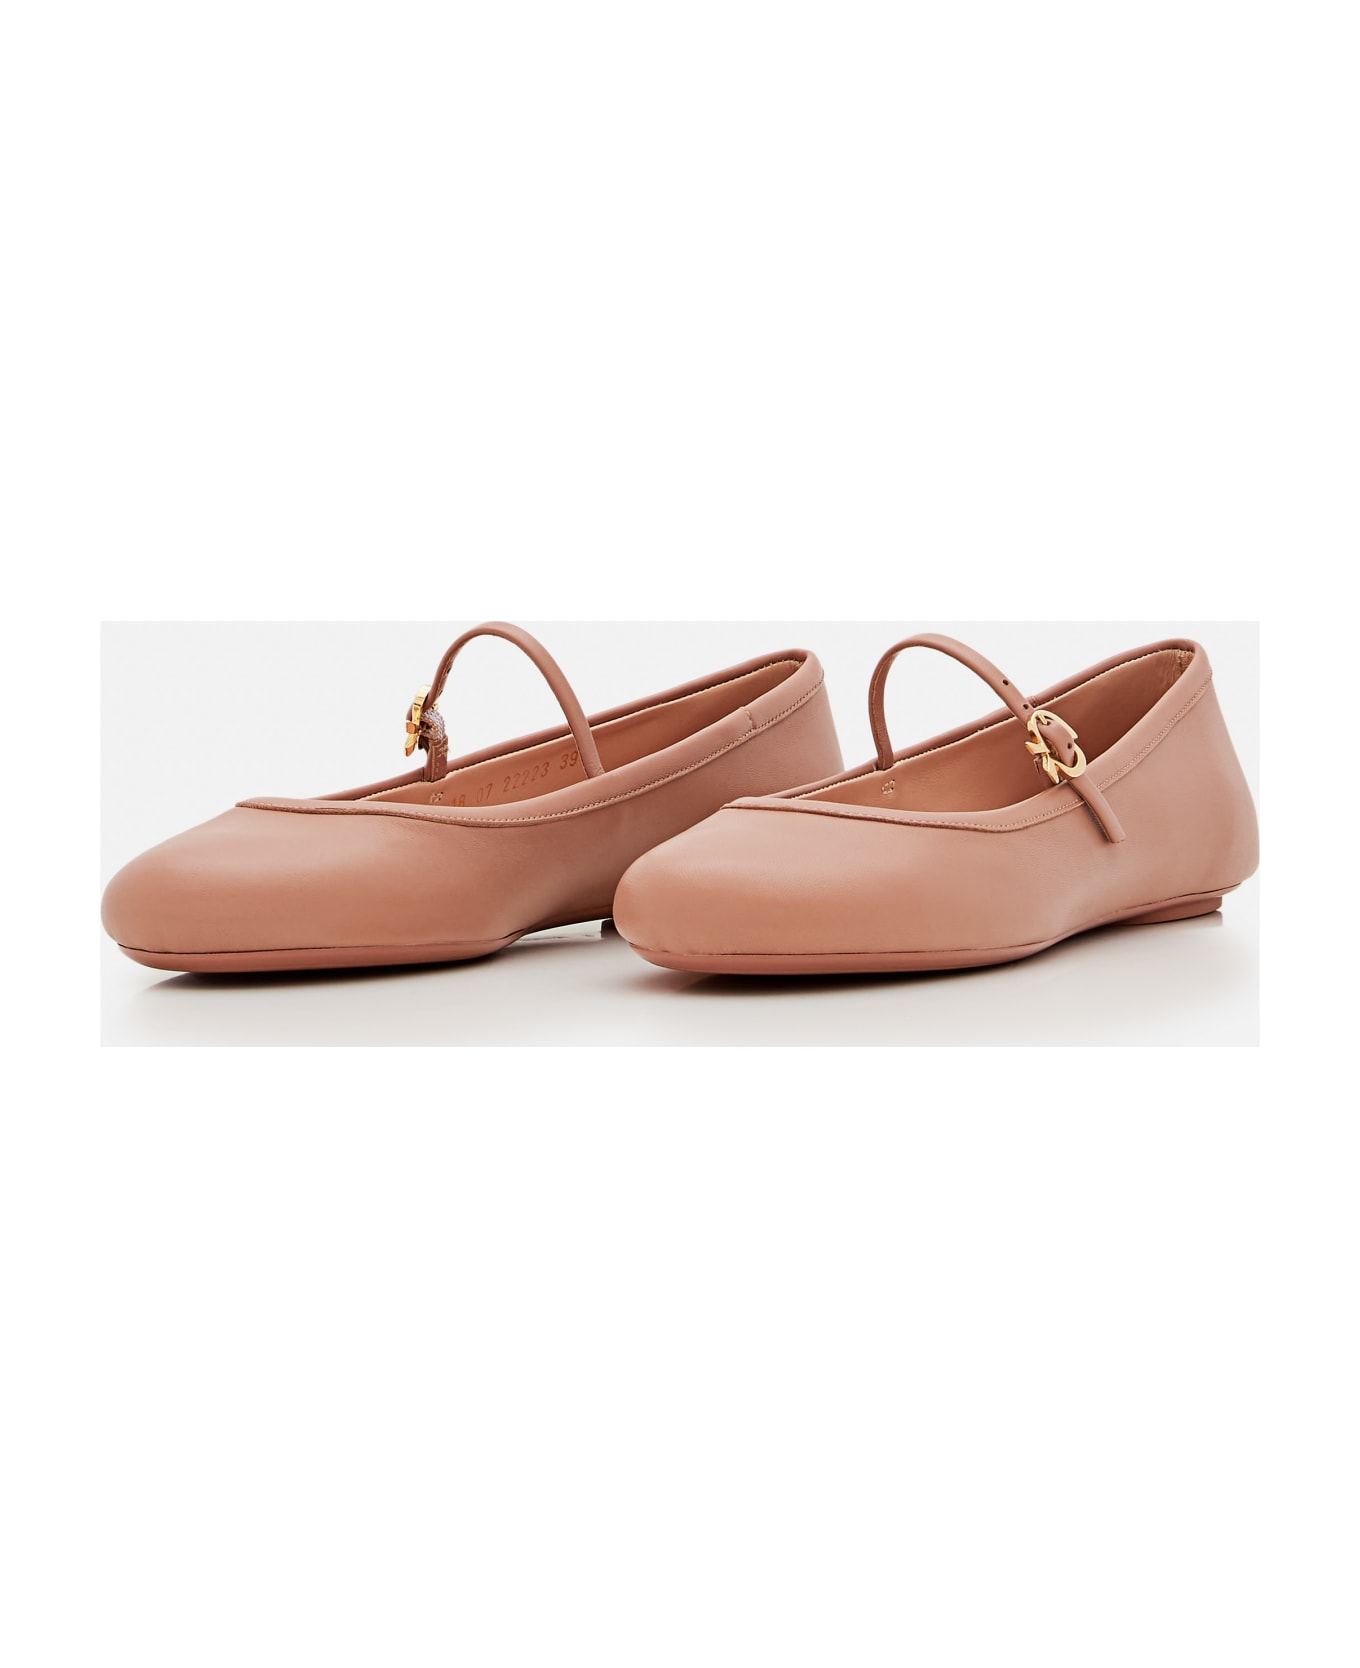 Gianvito Rossi Leather Ballet Flat - Pink